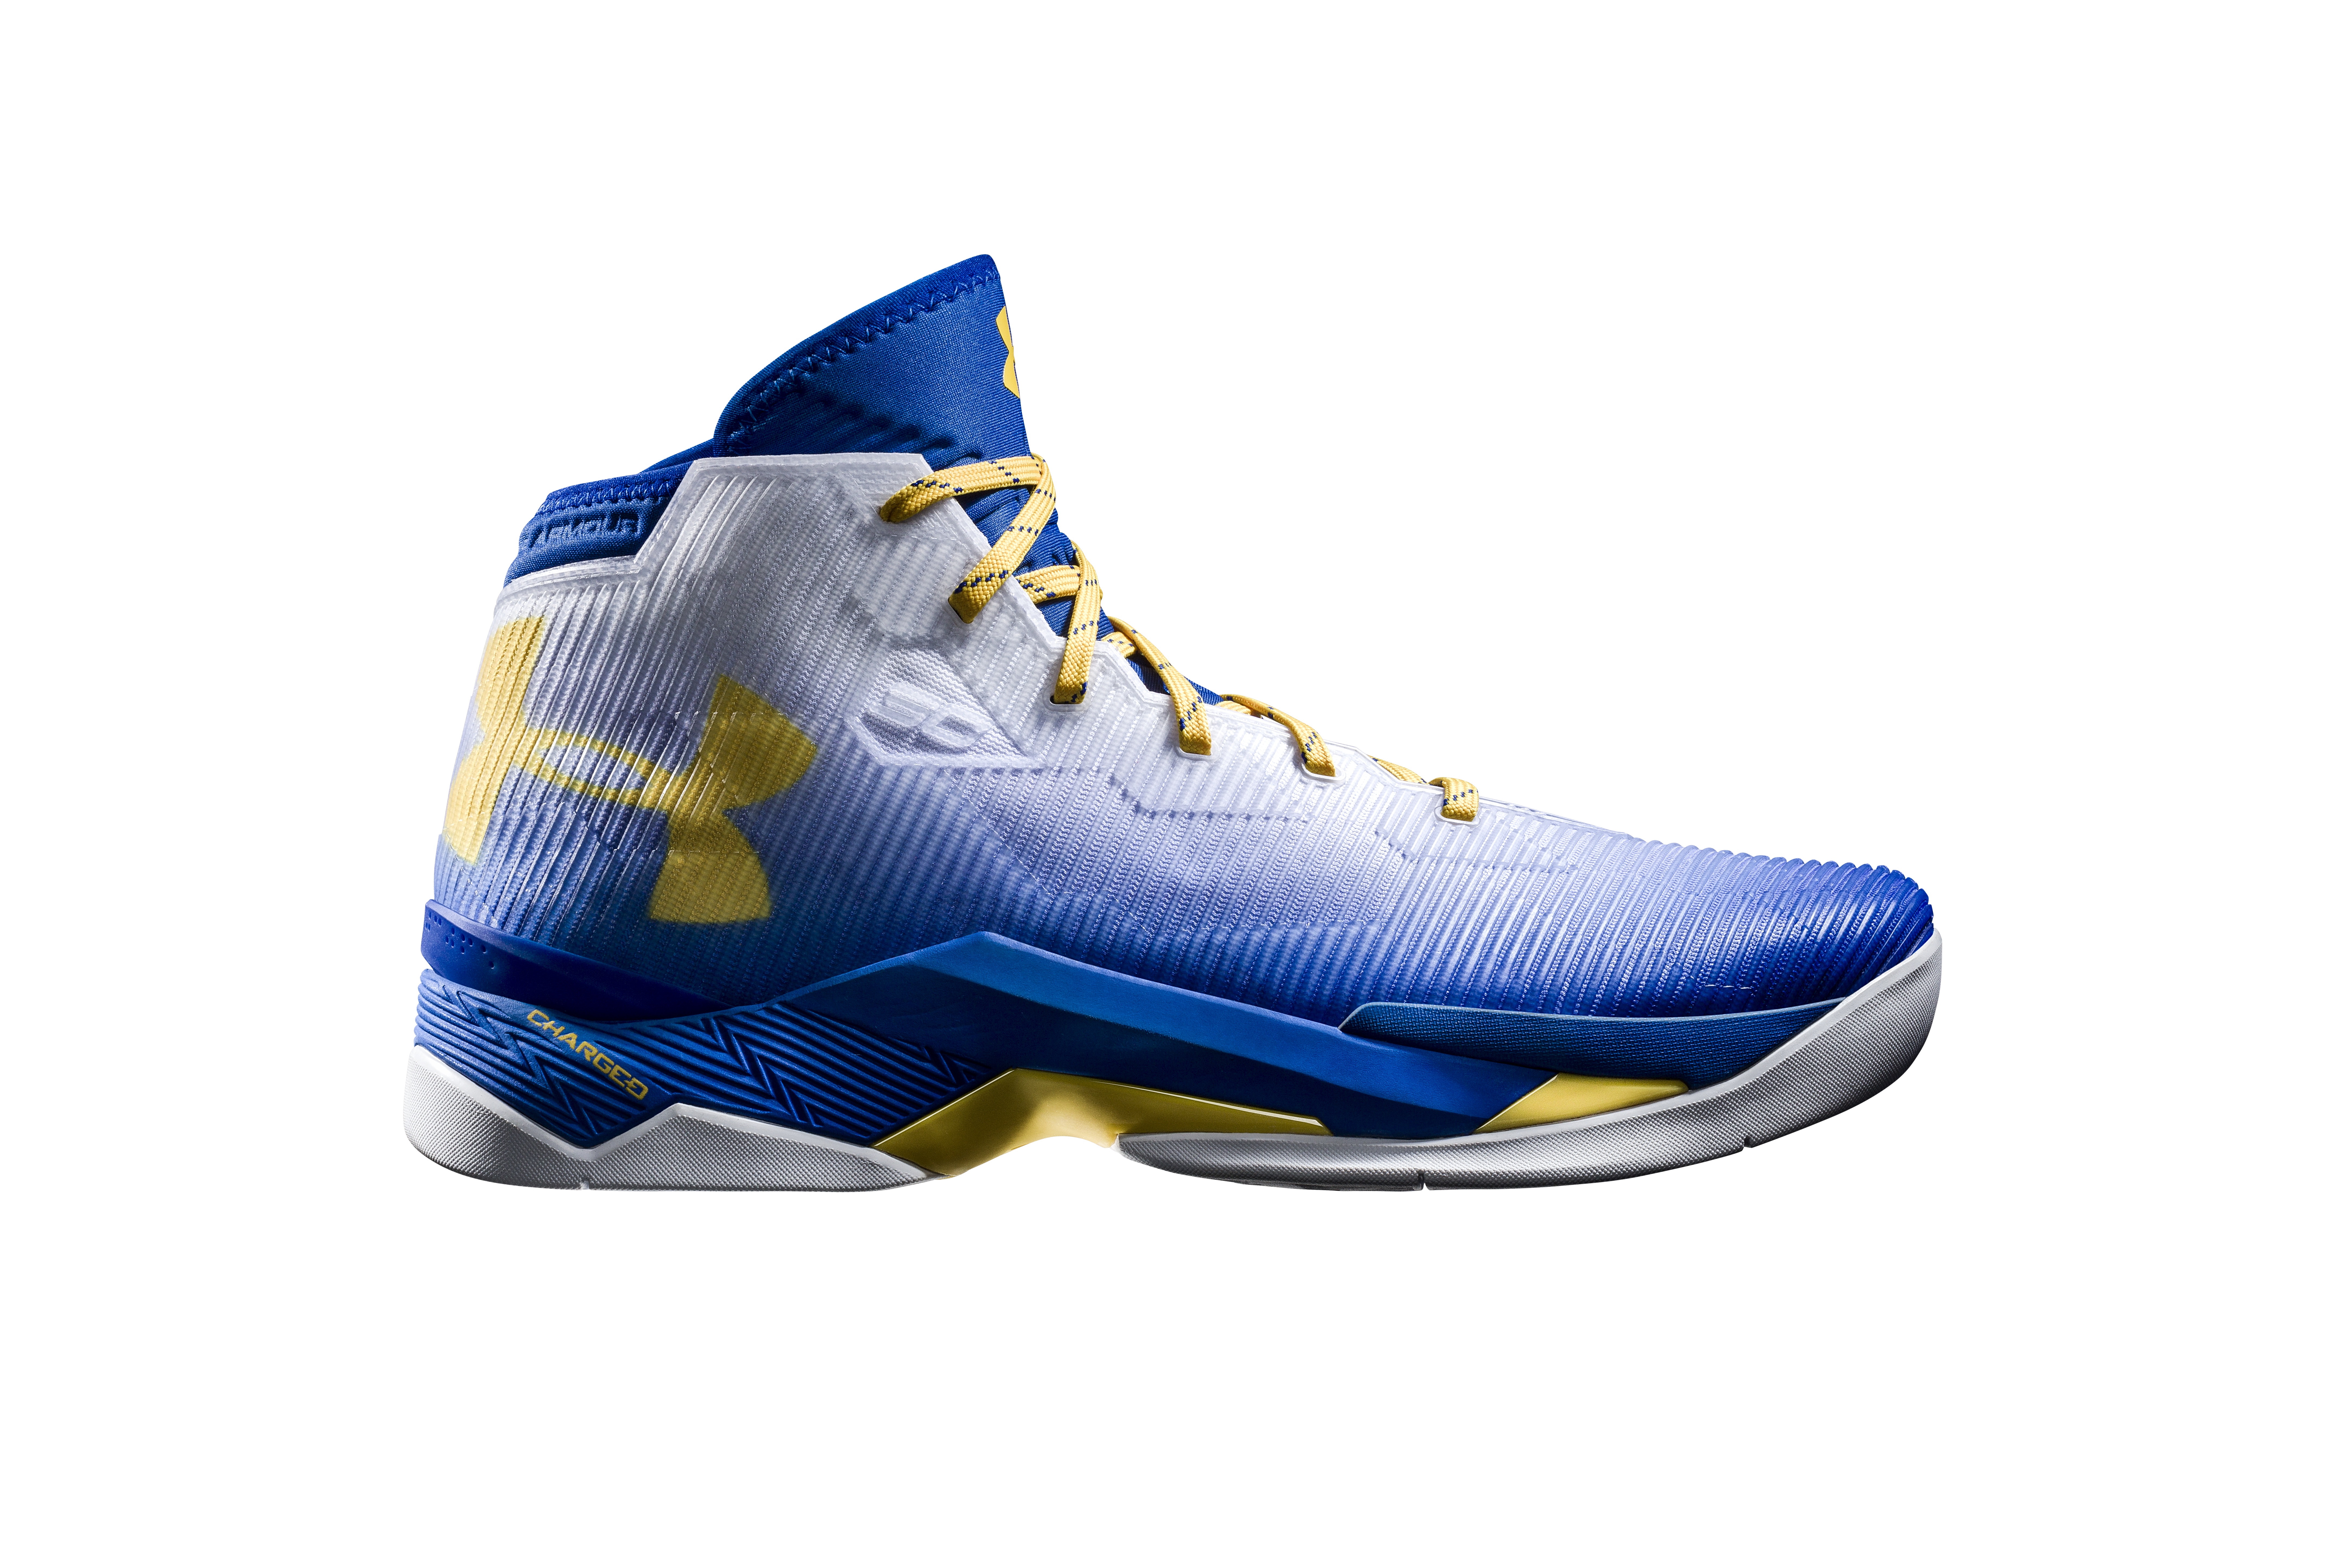 Under Armour Curry 2.5 "73-9"